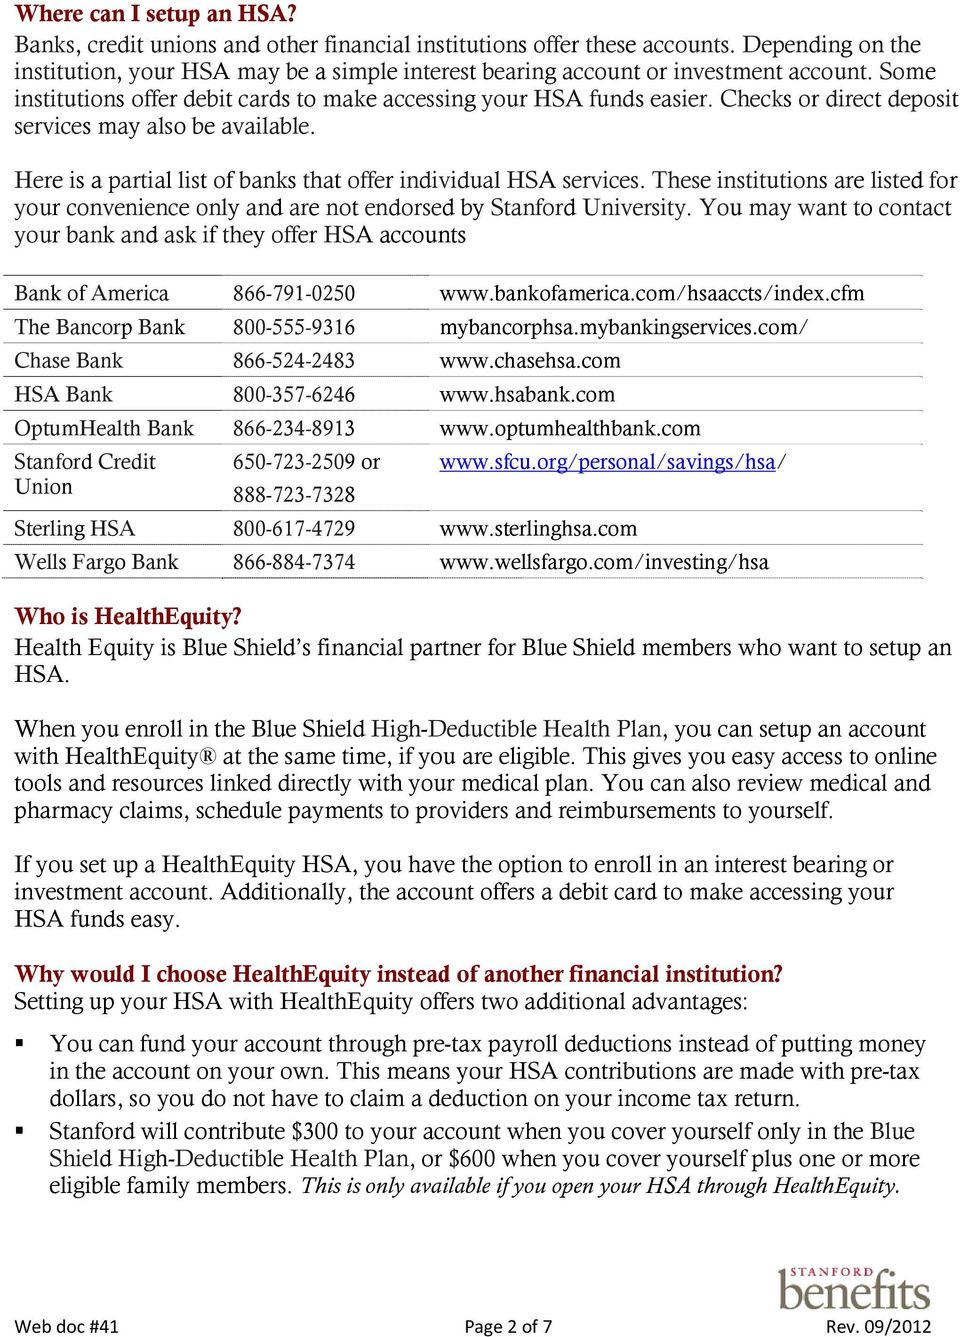 Checks or direct deposit services may also be available. Here is a partial list of banks that offer individual HSA services.